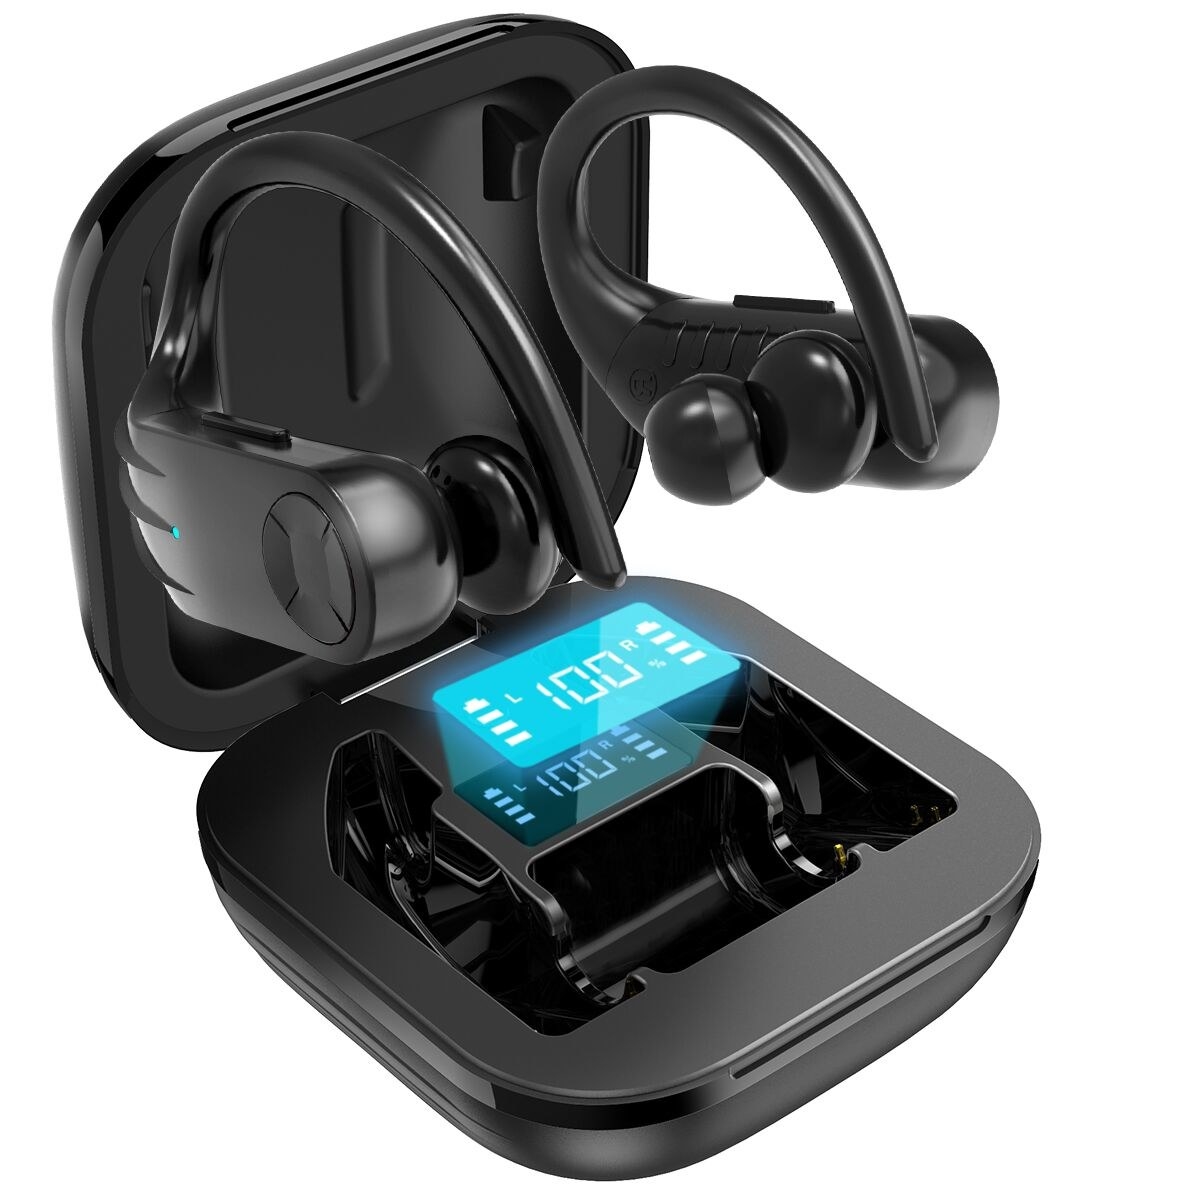 Black wireless earbuds outside of charging case with display screen